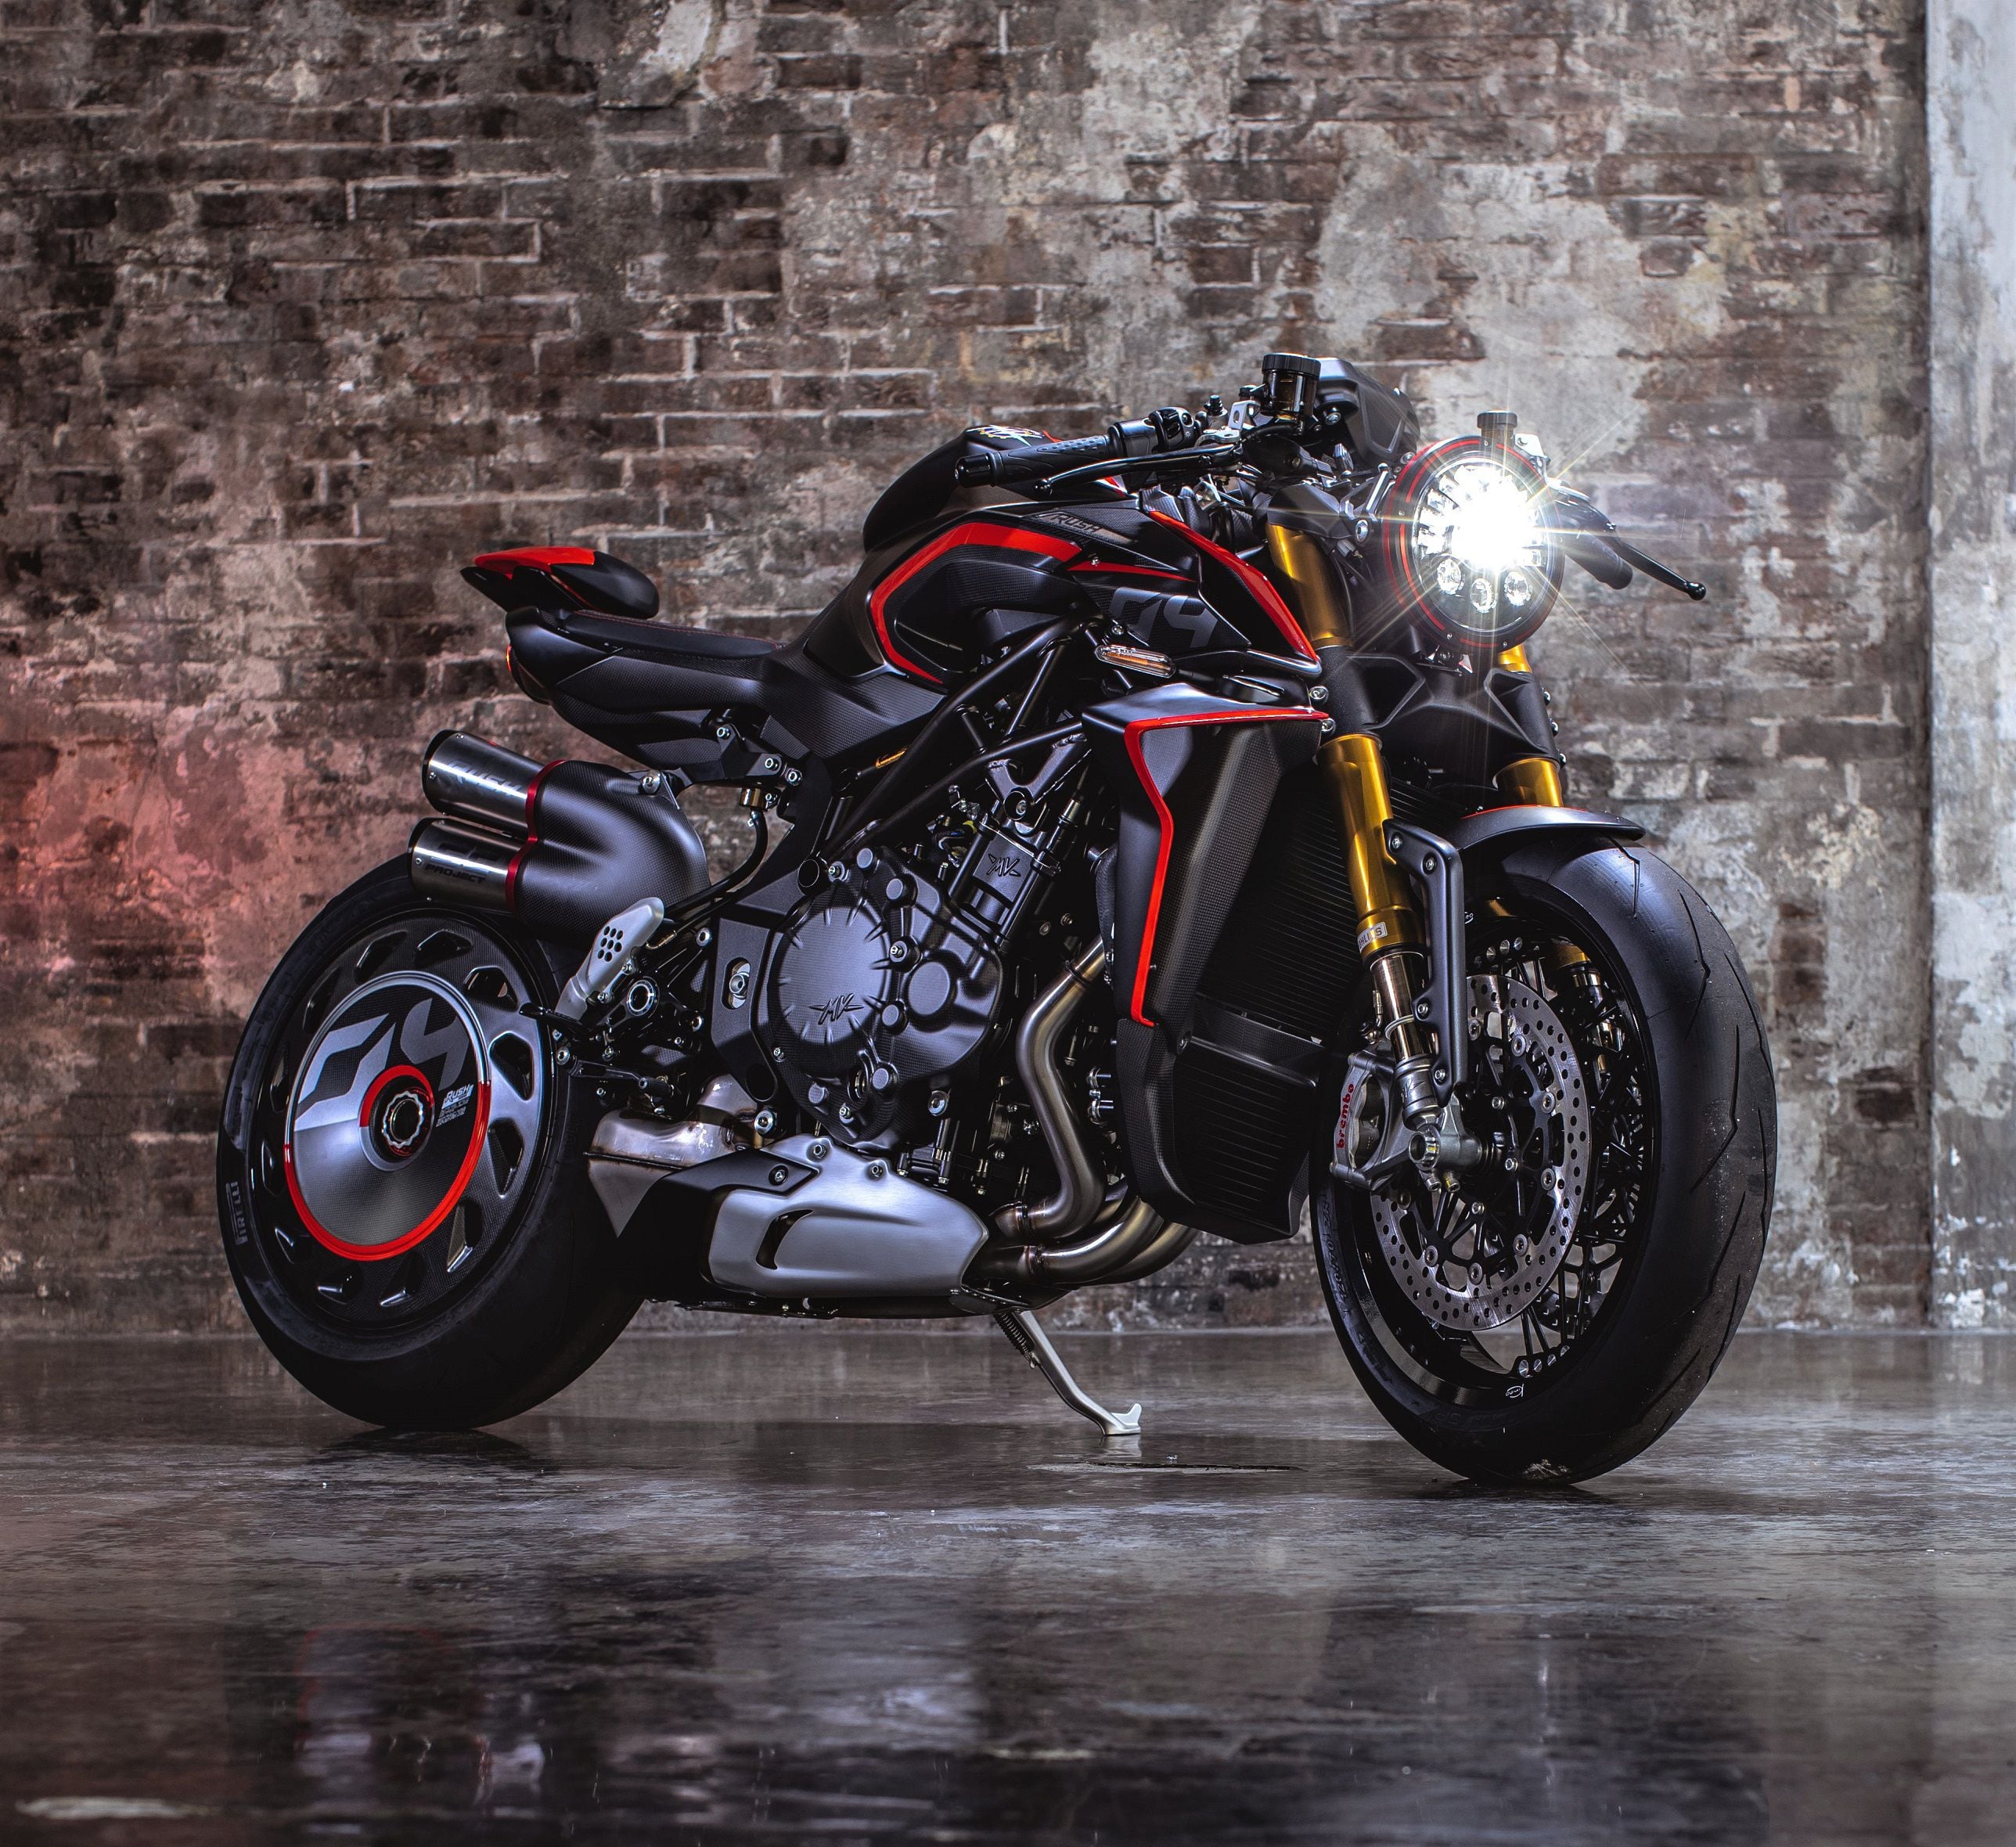 MV Agusta Brutale 1000 Serie Oro Prototype: Reinventing an 